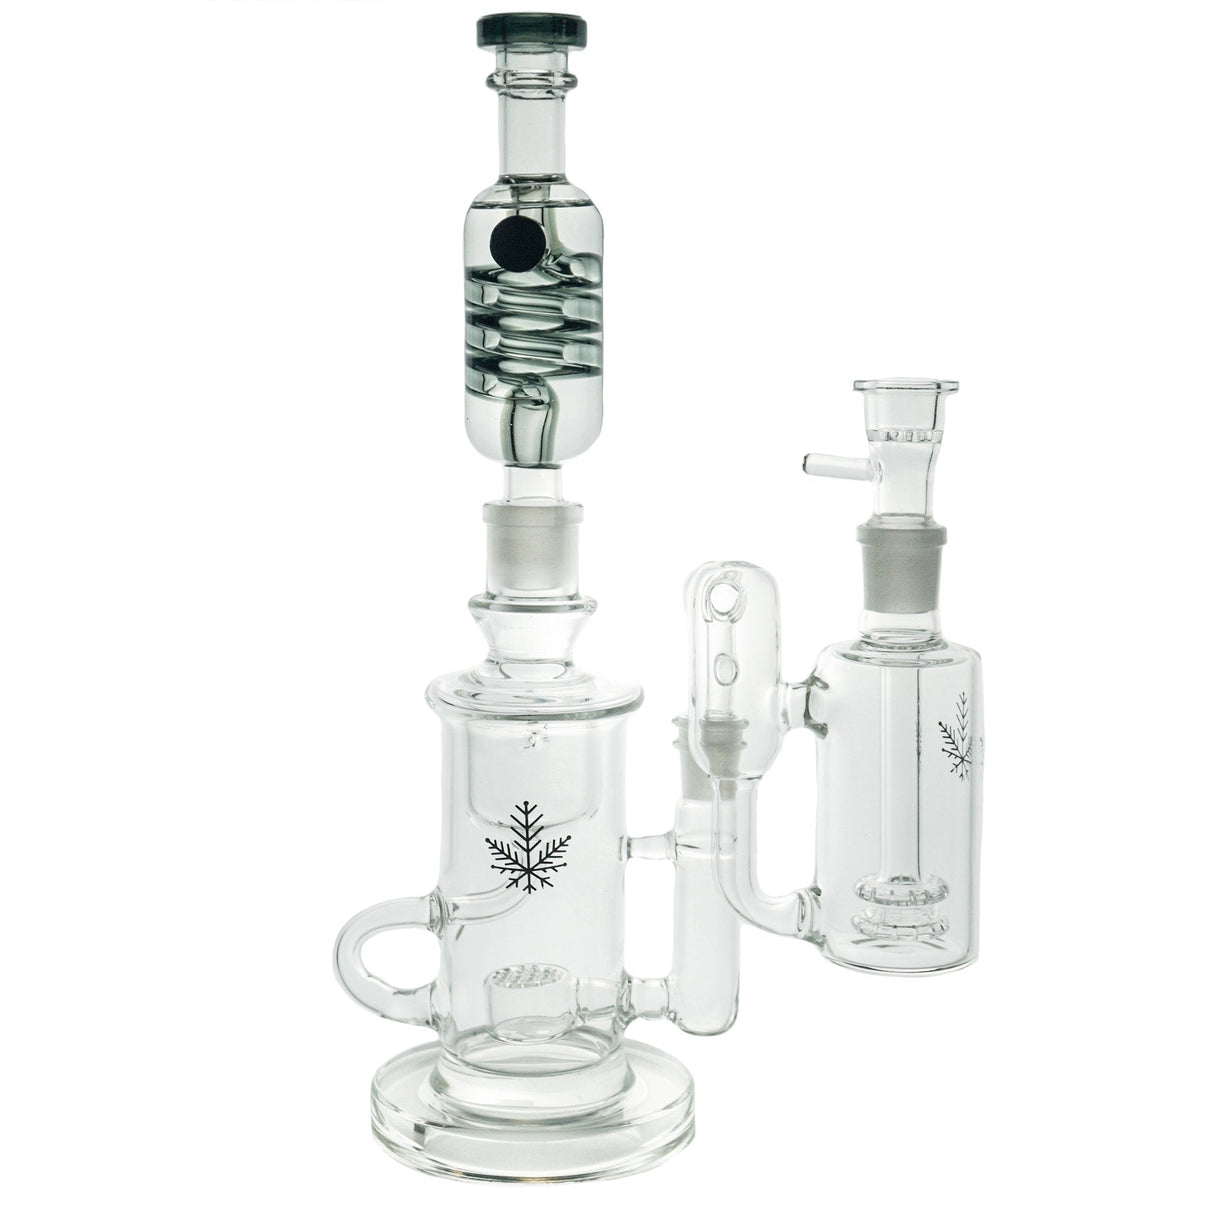 Freeze Pipe Ash Catcher with 14mm joint size, clear glass, front view on white background